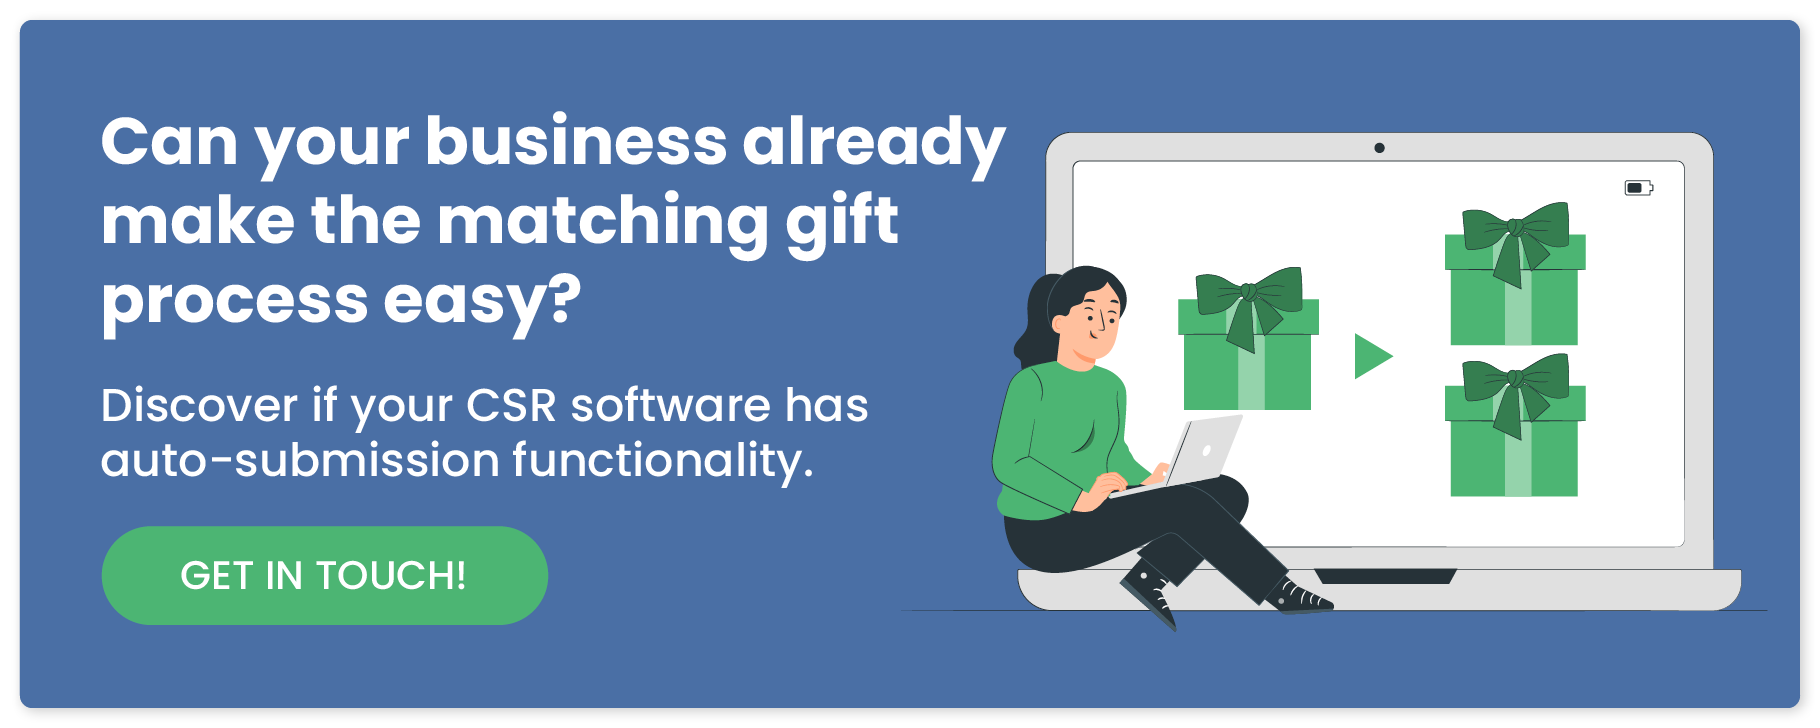 Can your business already make the matching gift process easy? Discover if your CSR software has auto-submission functionality. Get in touch!